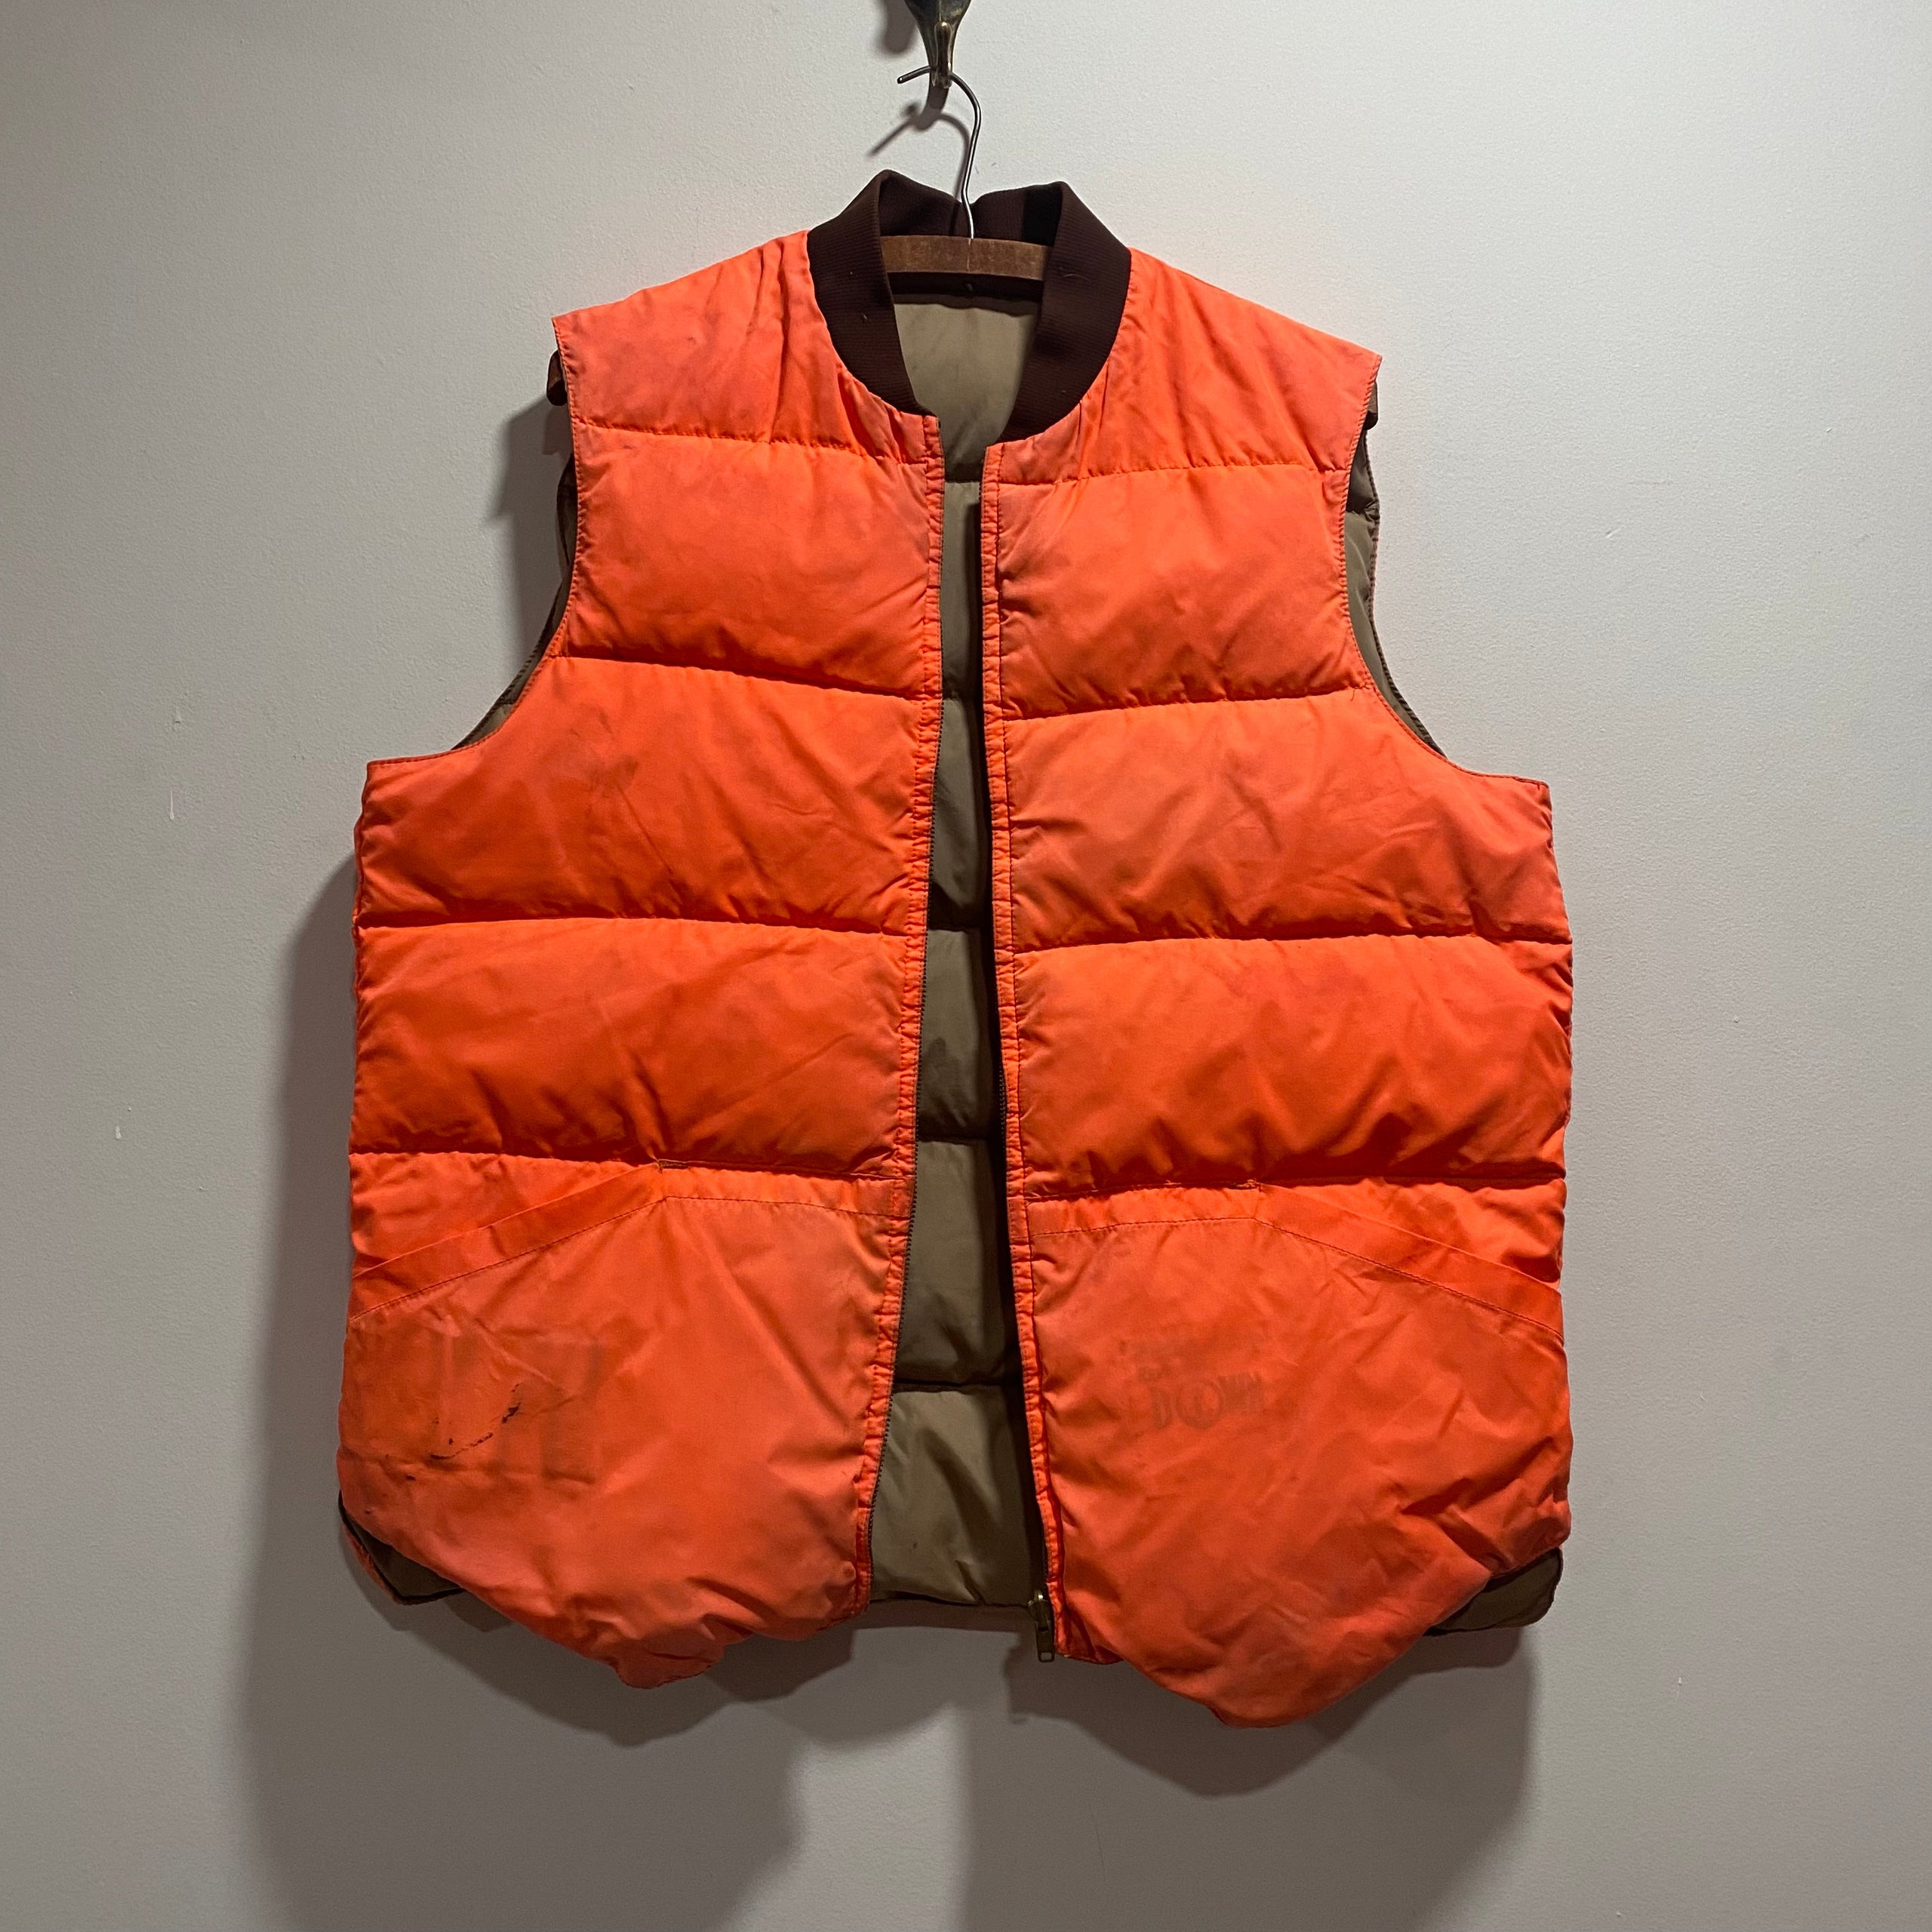 1970's Orange/Brown Reversible Down Hunting Puffer Vest by Kmart Size L/XL